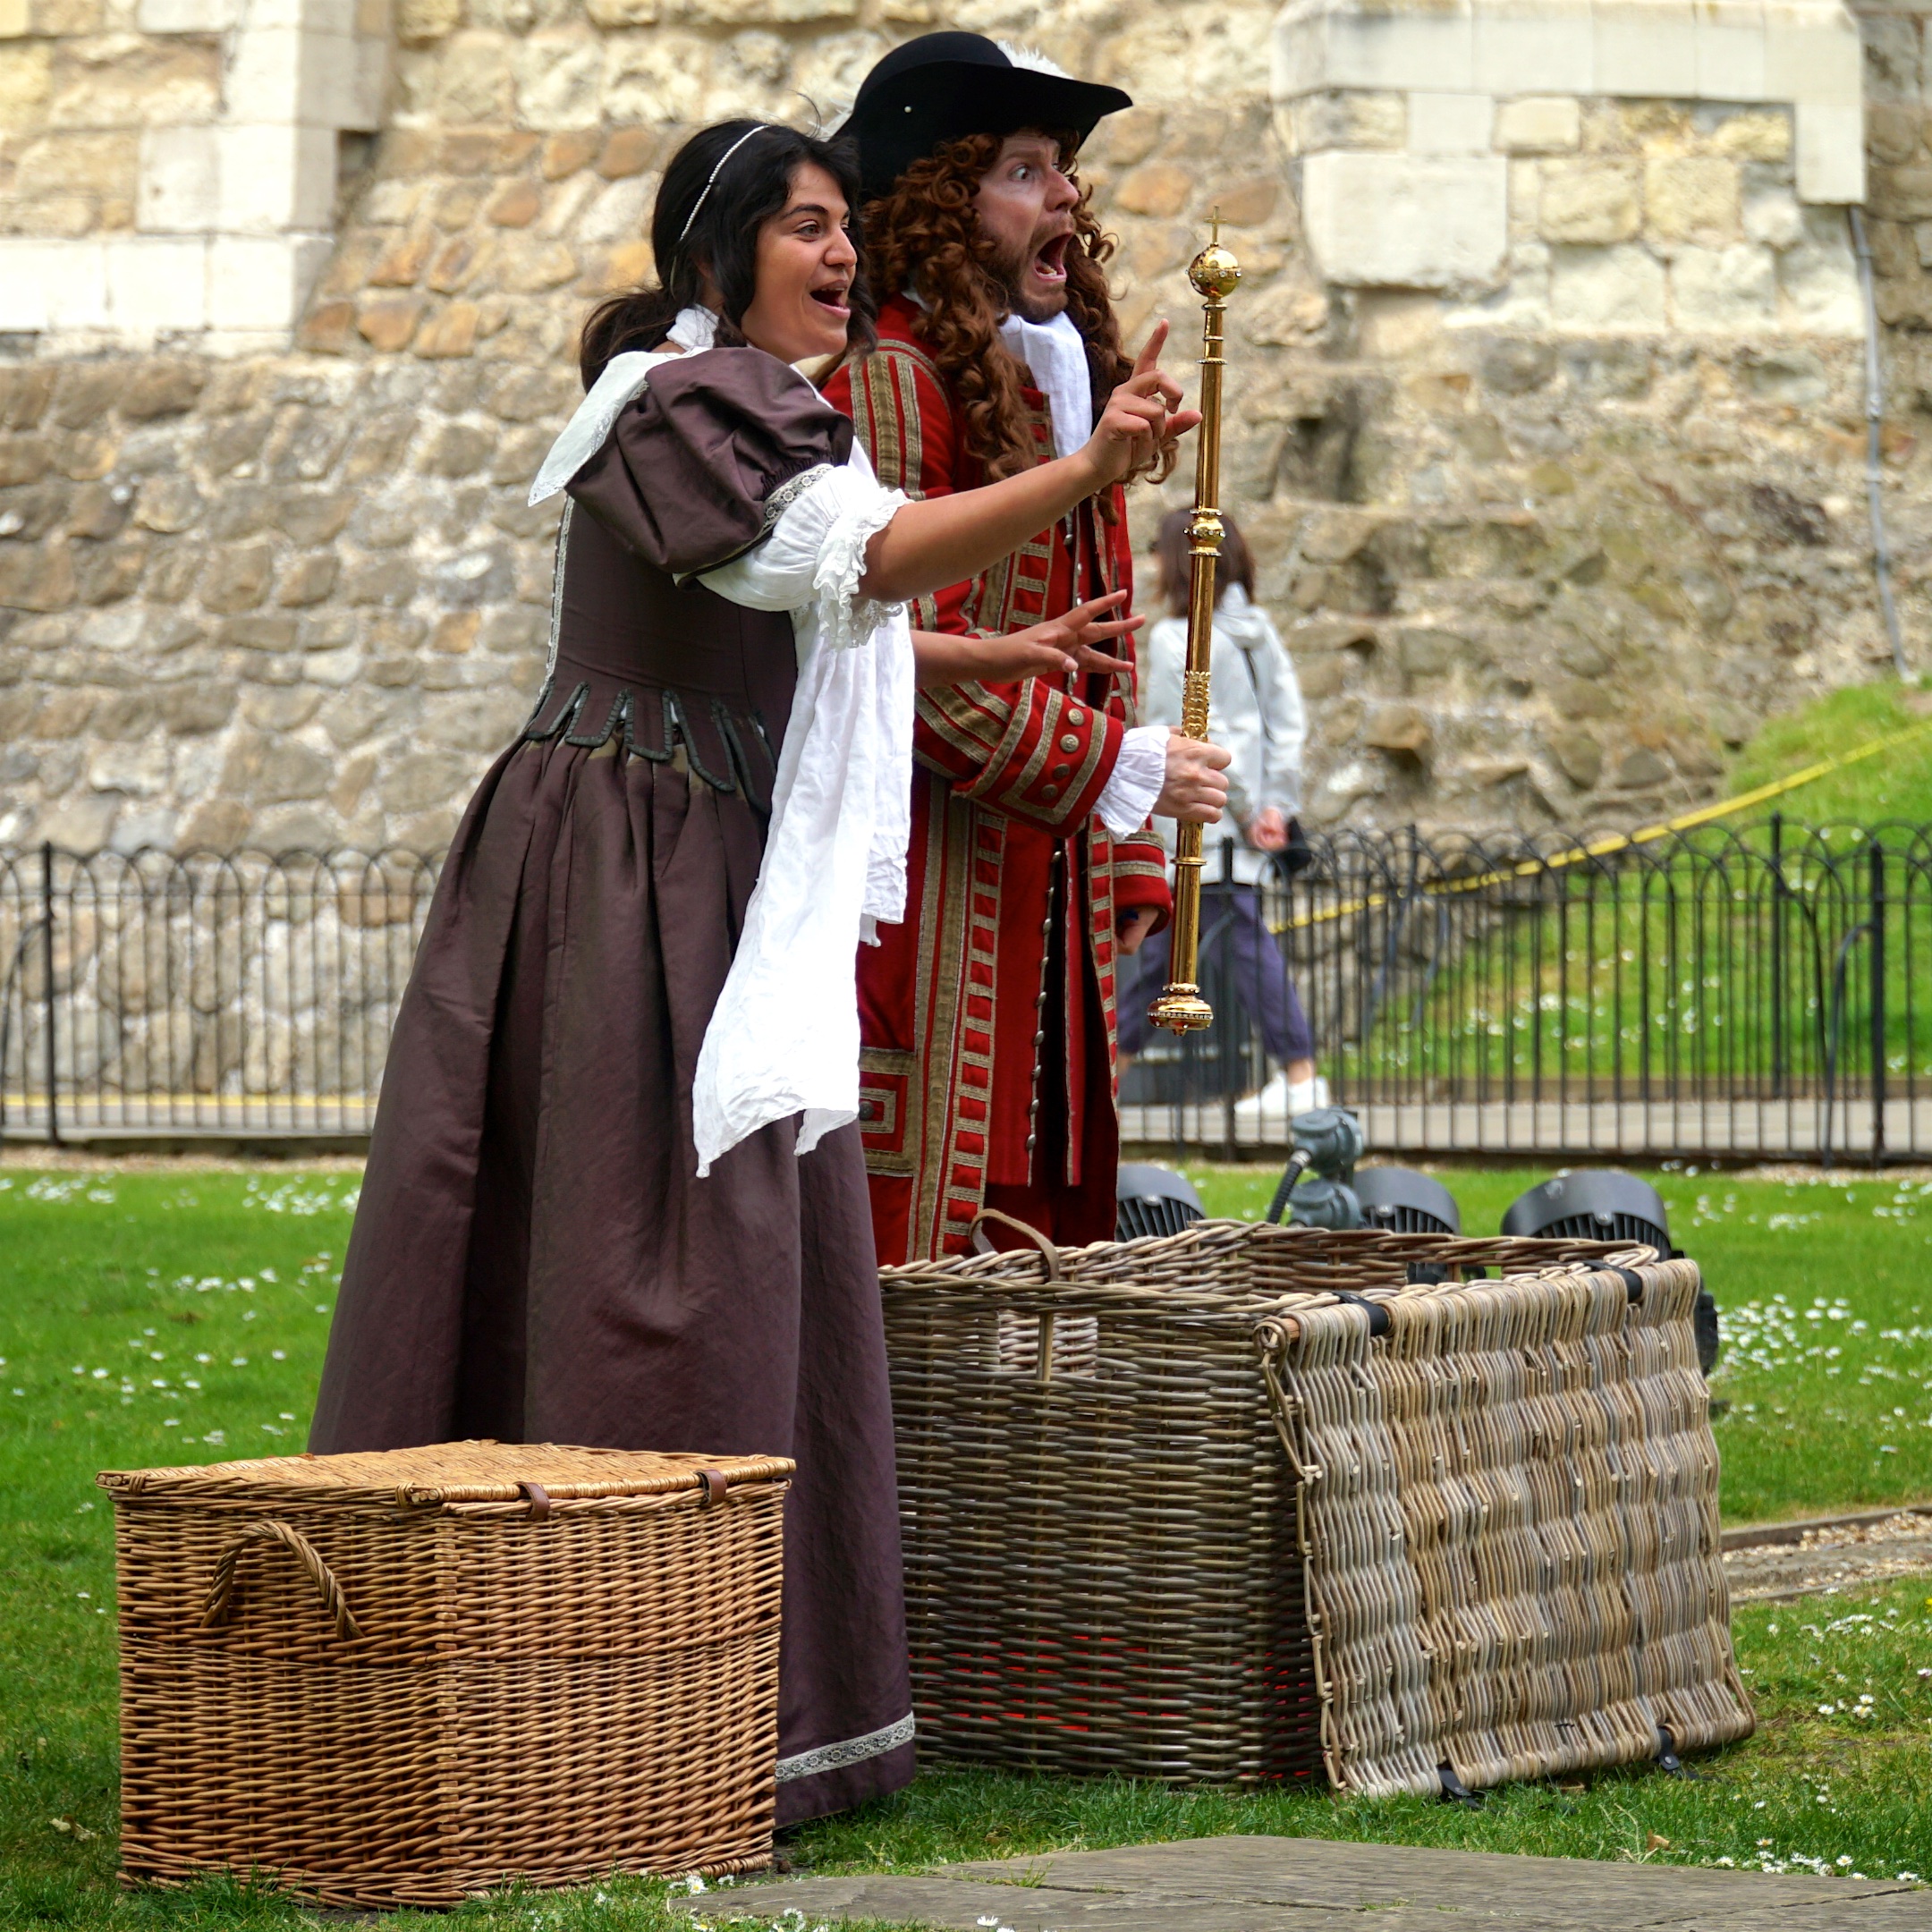 A high-status Restoration man and woman stand in front of the Tower of London looking shocked at having found the Crown Jewels in a wicker basket